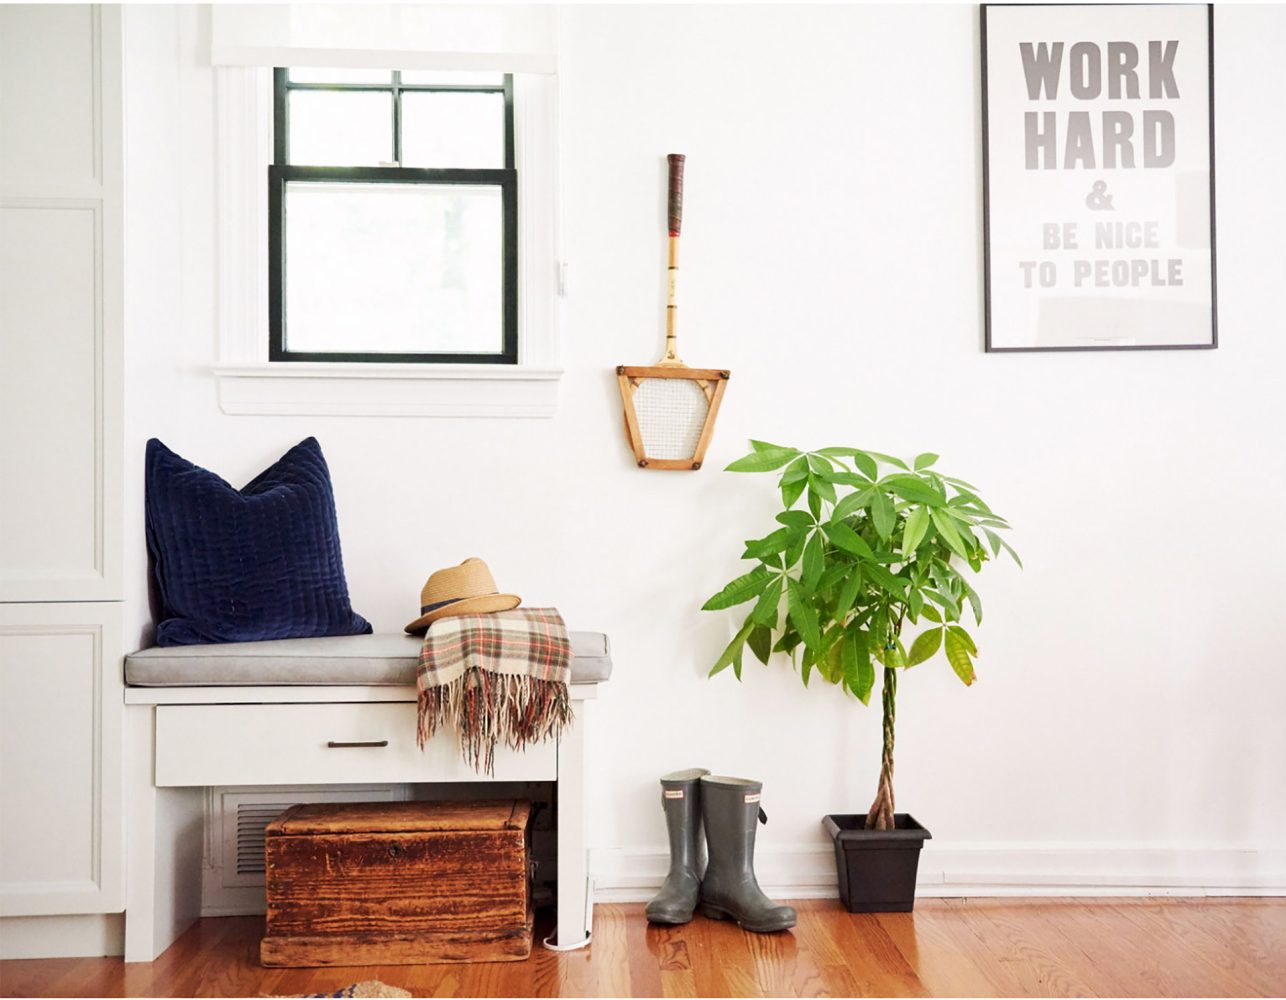 A nook in a room with white walls and medium wood floors. There is a small bench with a gray cushion, navy blue pillow, plaid throw blanket. A vintage tennis racquet hangs on the wall next to a print that says Work Hard & Be Nice To People.